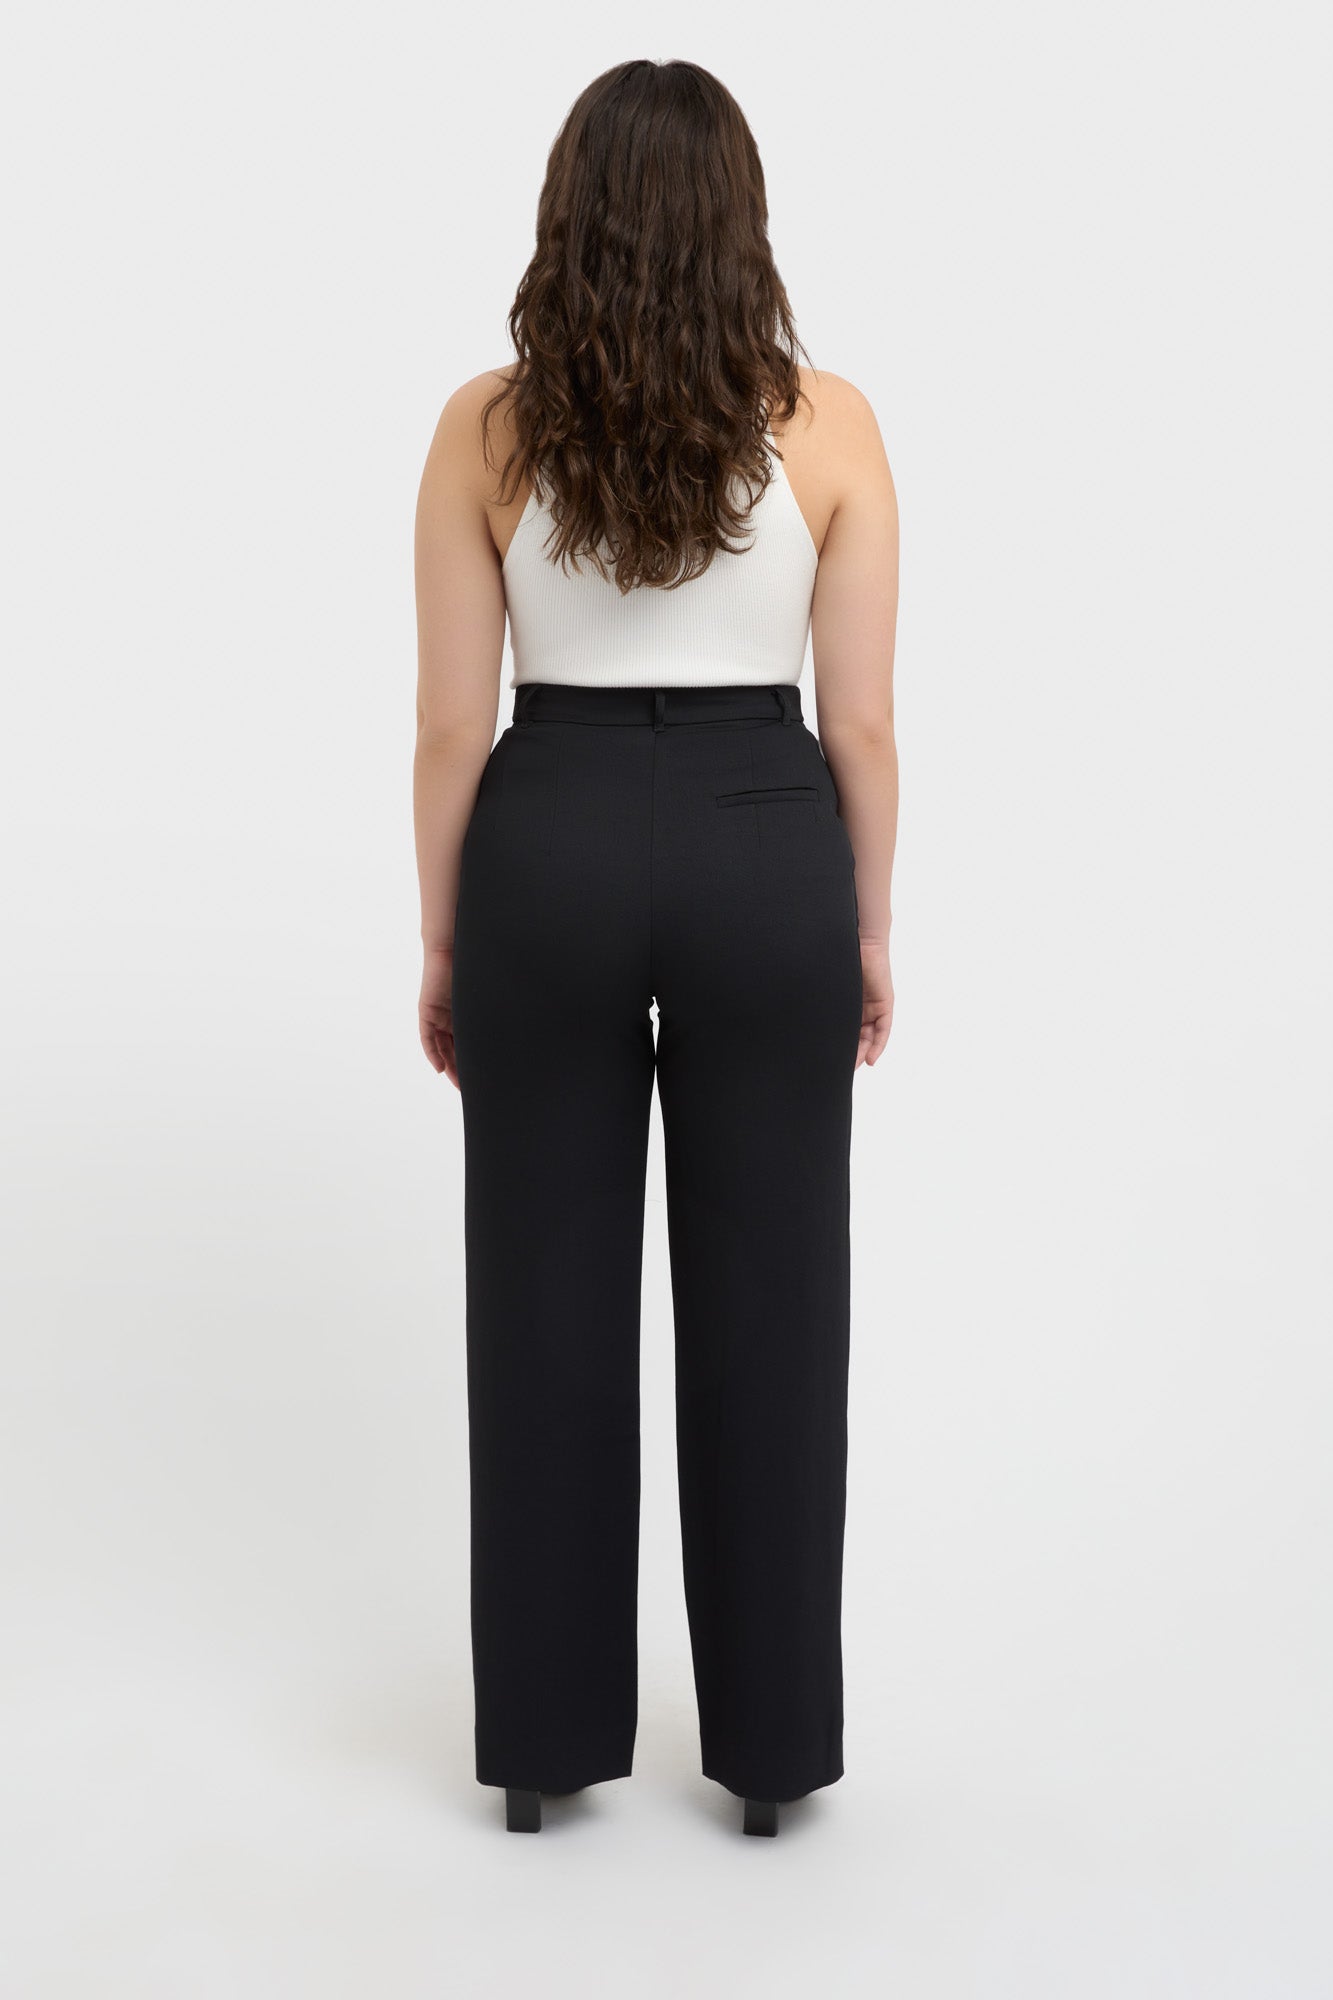 Fountain Tailored Pant Beige - SALE